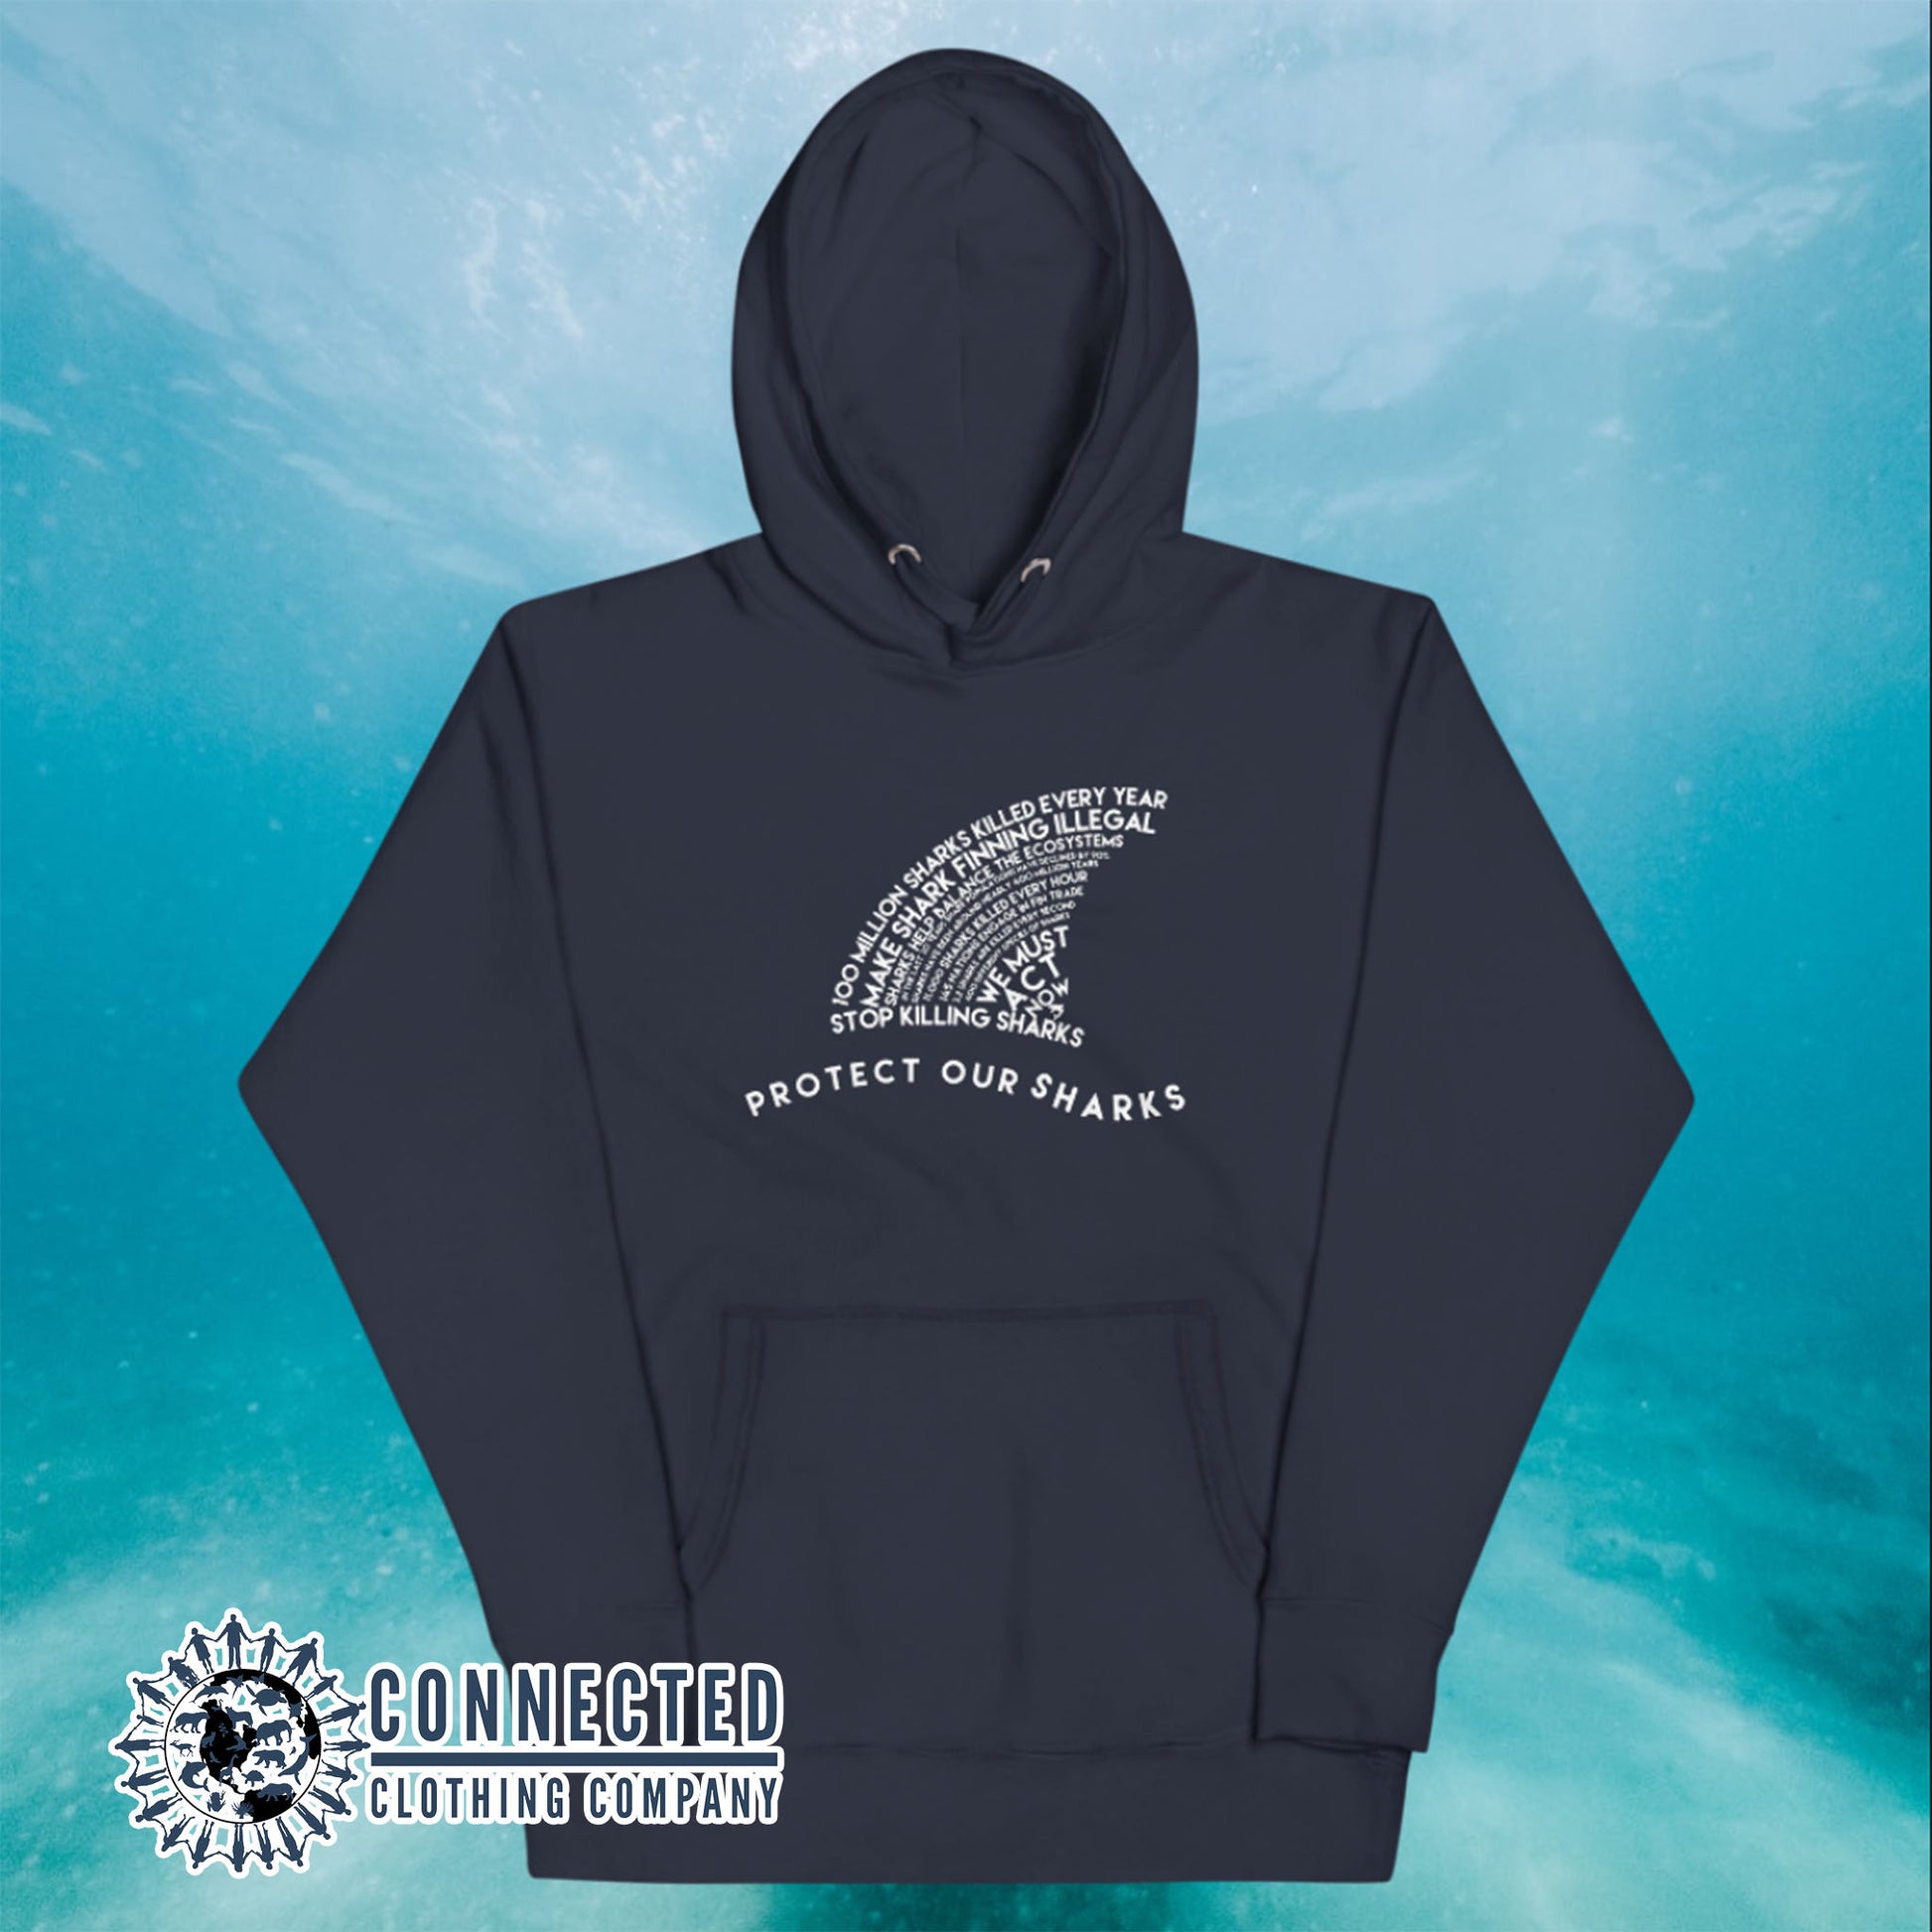 Navy Protect Our Sharks Unisex Hoodie - Connected Clothing Company - Ethically and Sustainably Made - 10% donated to Oceana shark conservation